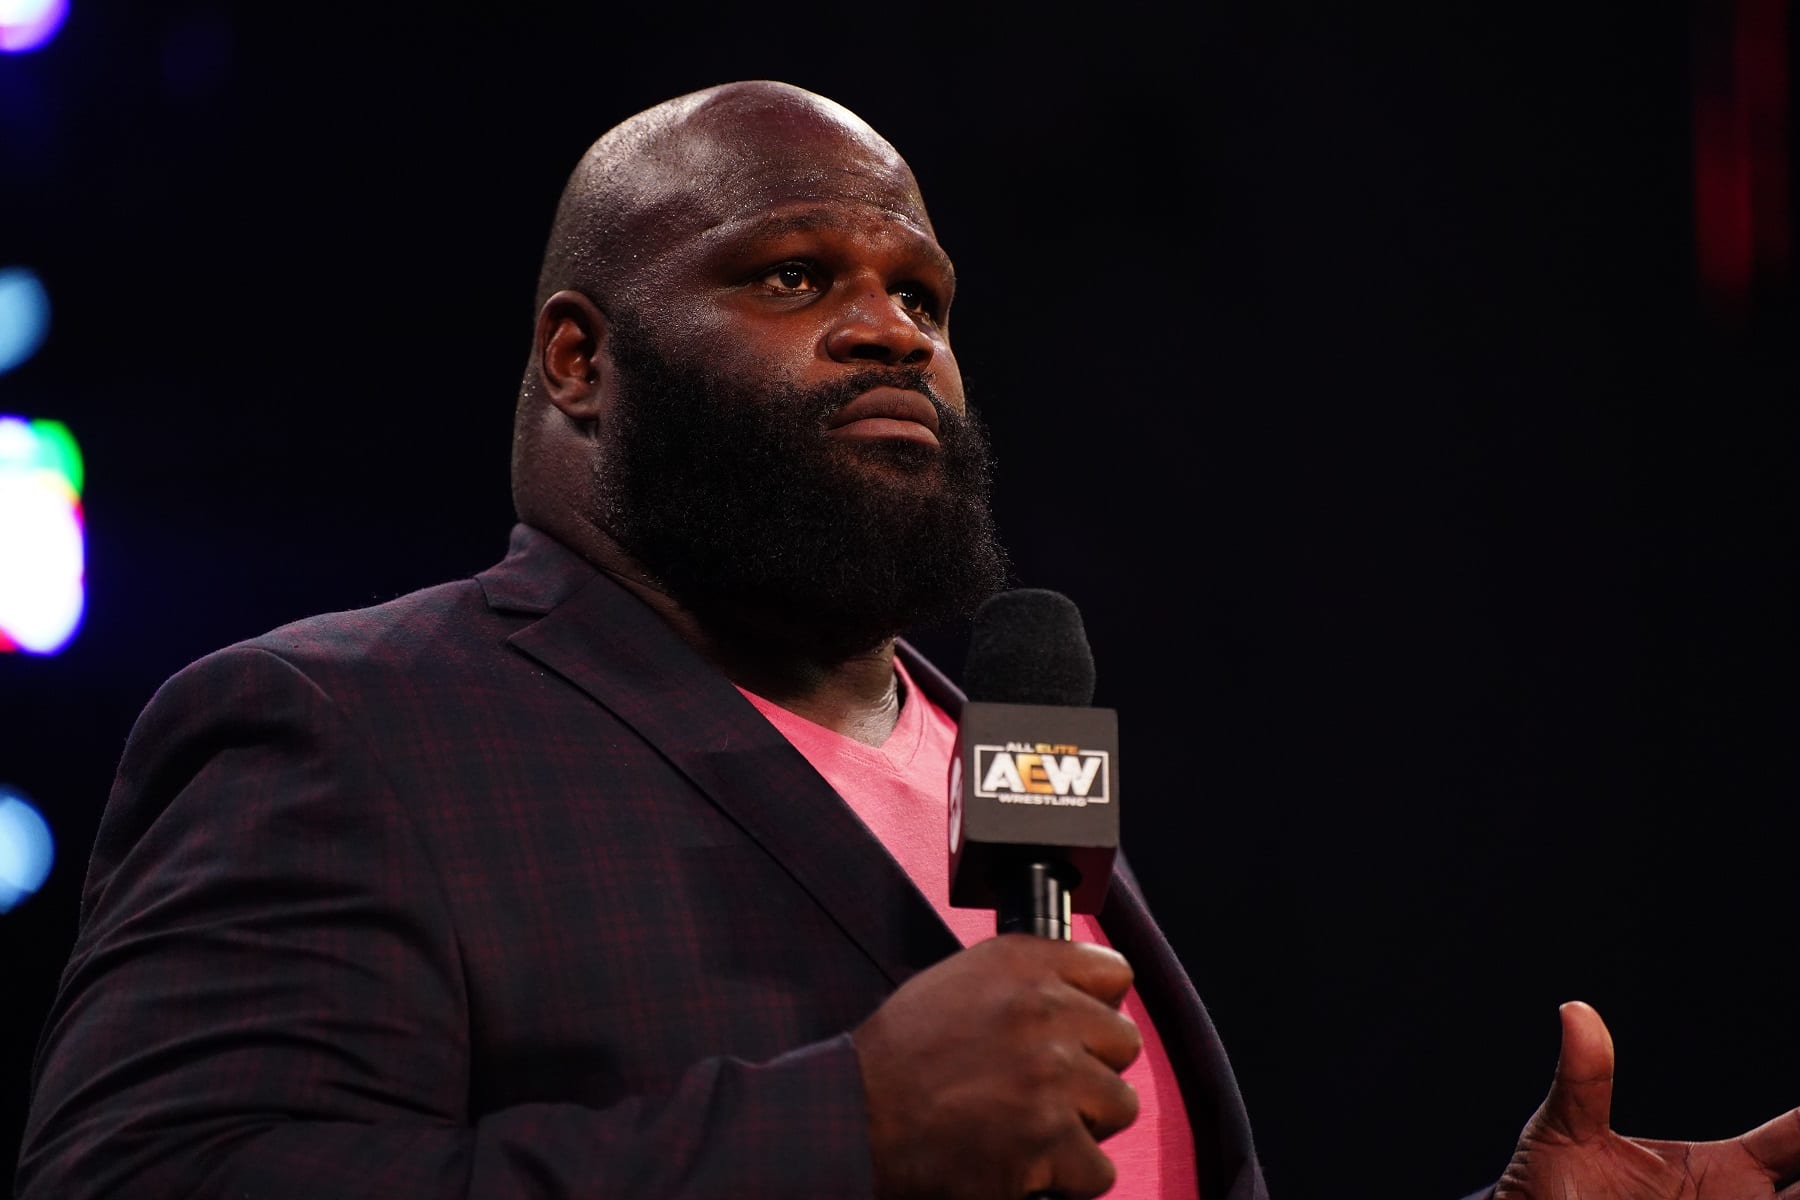 Mark Henry Tony Khan is happy with what I’ve added to AEW